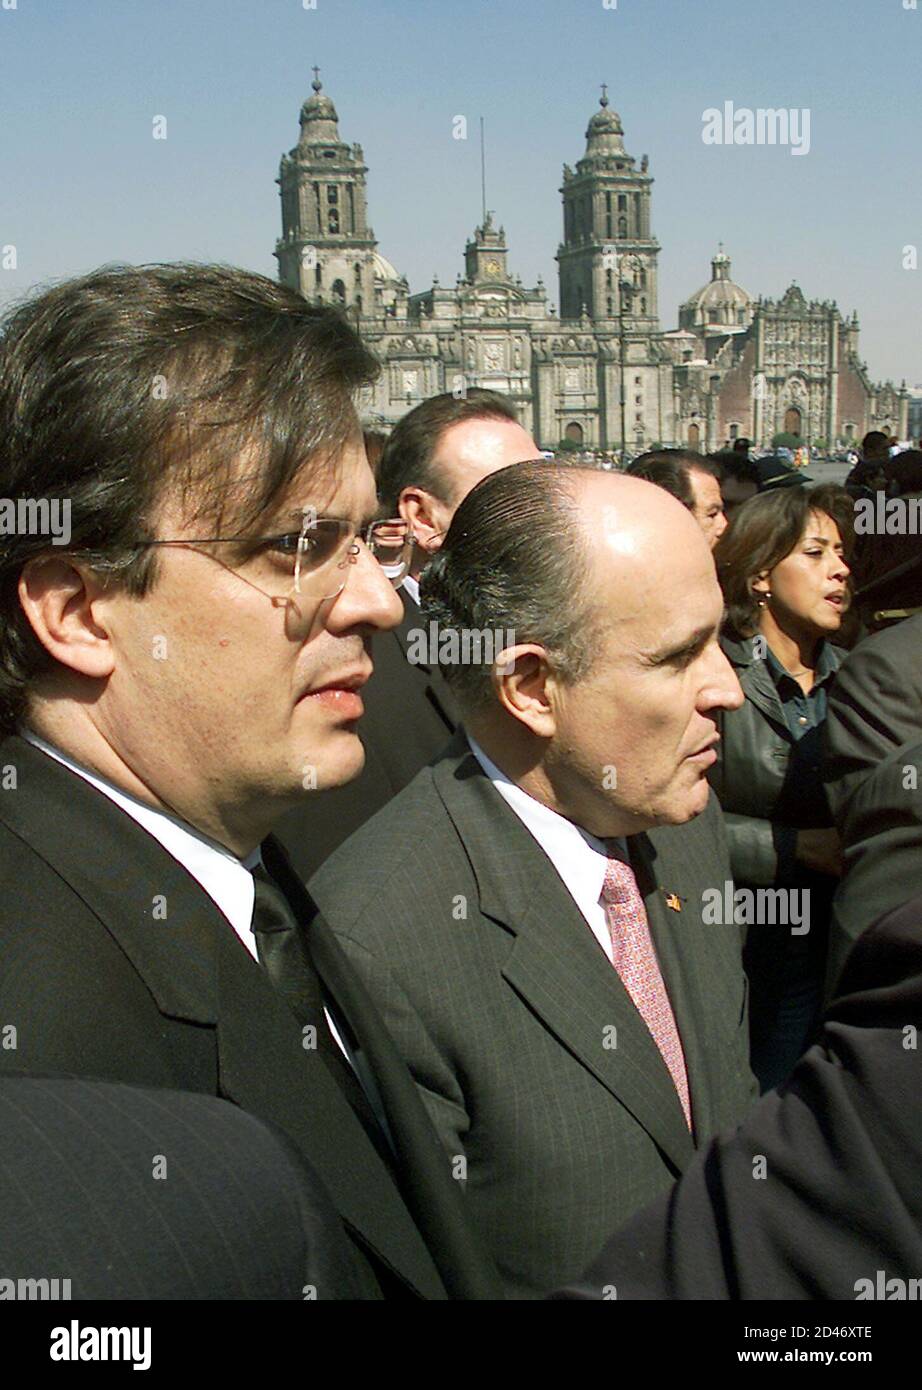 Former New York Mayor Rudy Giuliani (C) and Mexico City's police chief Marcelo Ebrad (L) walk during a tour in the Main Square of Mexico City on January 15, 2002. Famed for taming the streets of New York in the 1990's with his 'zero tolerance' crime policy, Giuliani has been hired for $4.3 million by a group of prominent Mexican businessmen to reduce Mexico City's soaring crime rate. REUTERS/Daniel Aguilar  DA Stock Photo